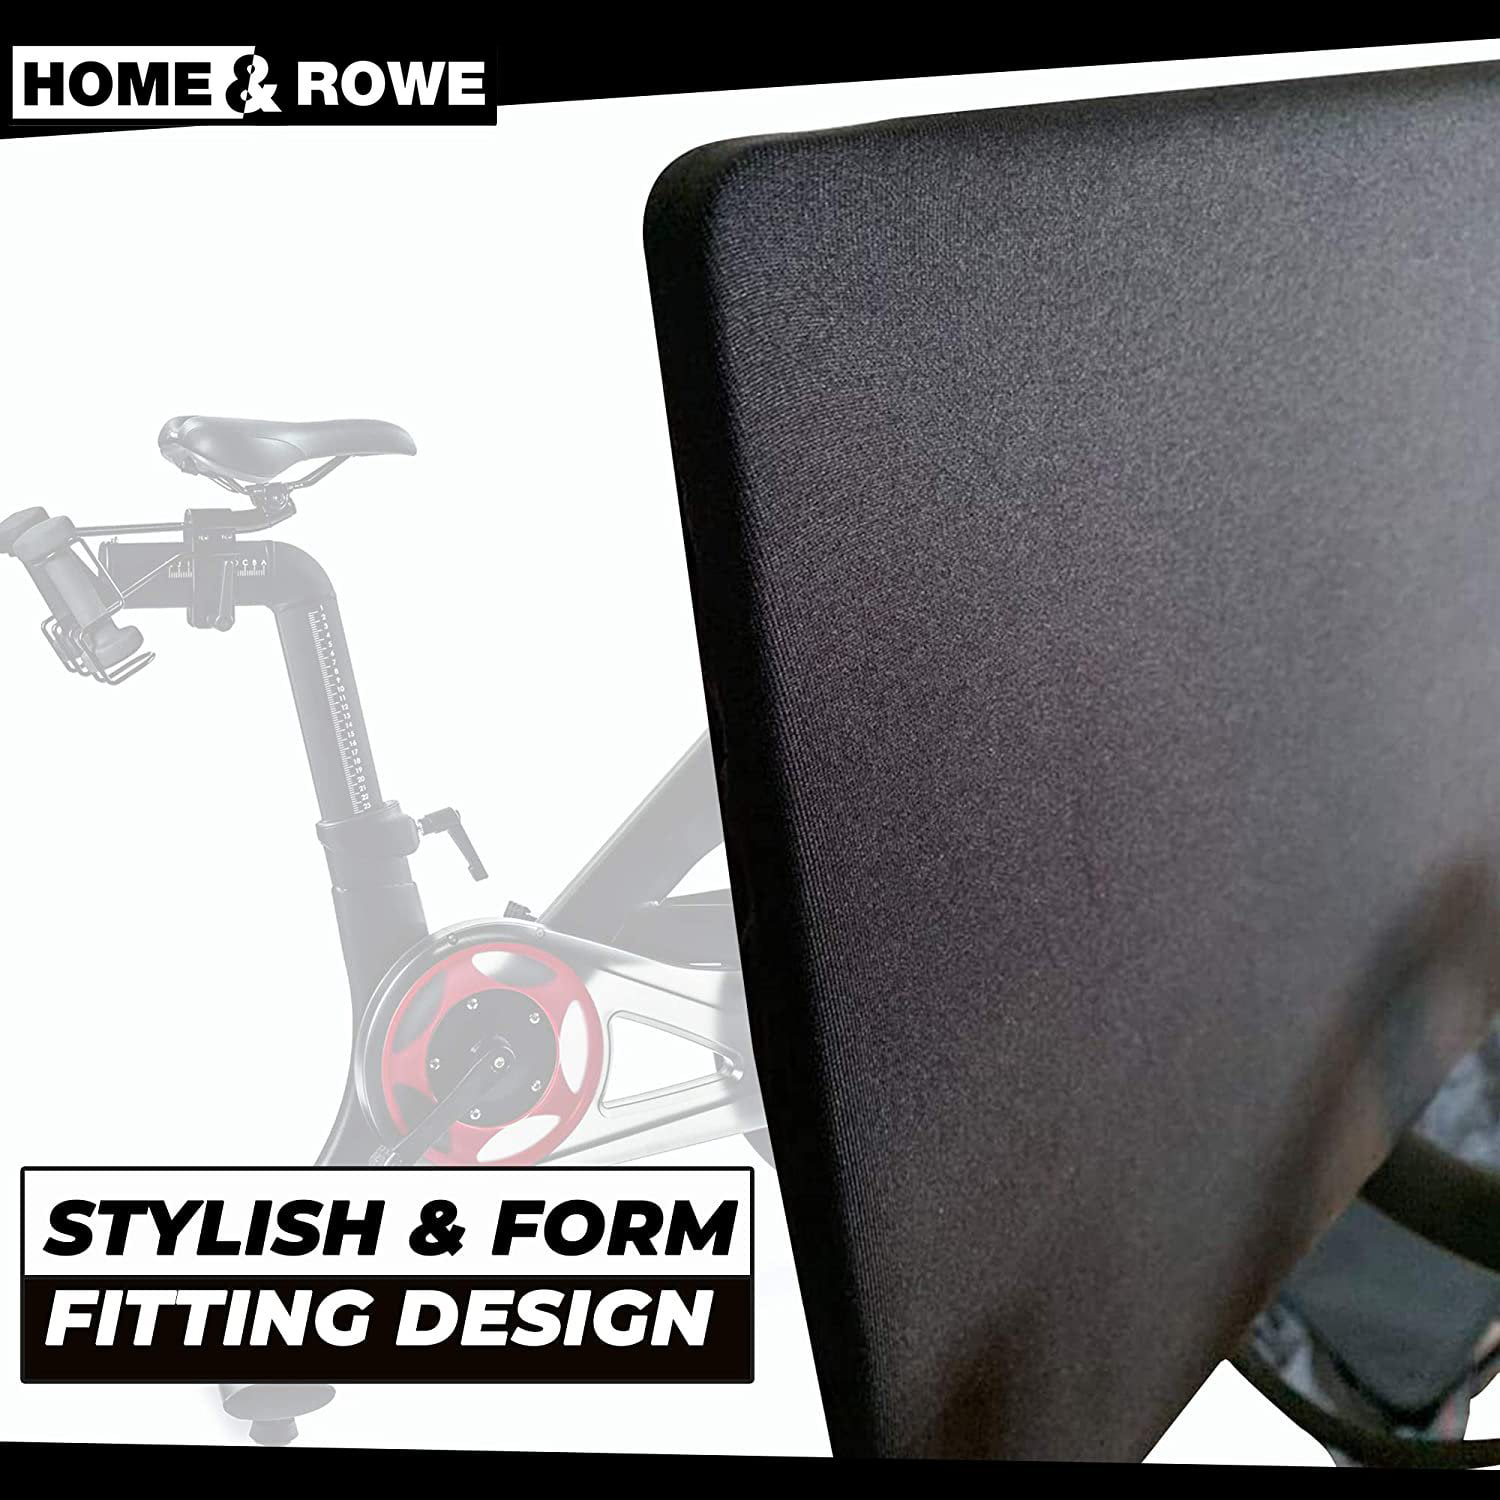 Includes a Free Peloton Screen Protector Cover Ideal Peloton Accessories Bike Home & Rowe Peloton Bike Cover Designed for Original Peloton Bike 